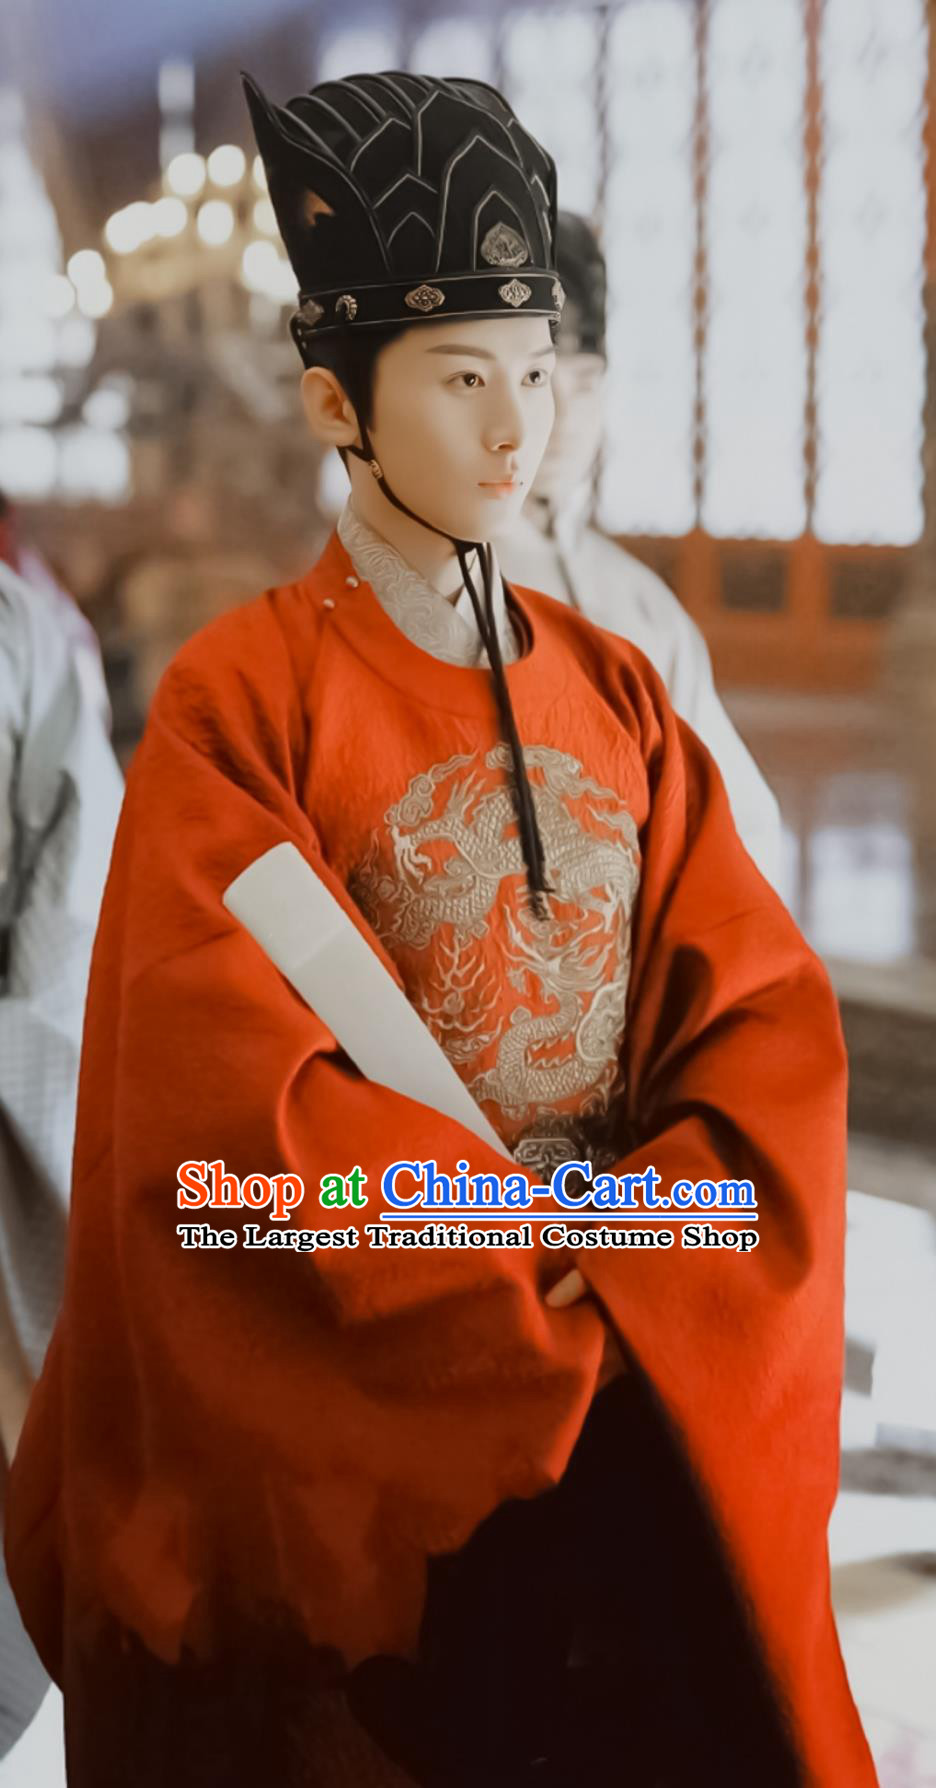 China Song Dynasty Official Robe 2020 TV Series The Promise of Chang An Prime Minister Xiao Cheng Xu Costume Ancient Chinese Clothing